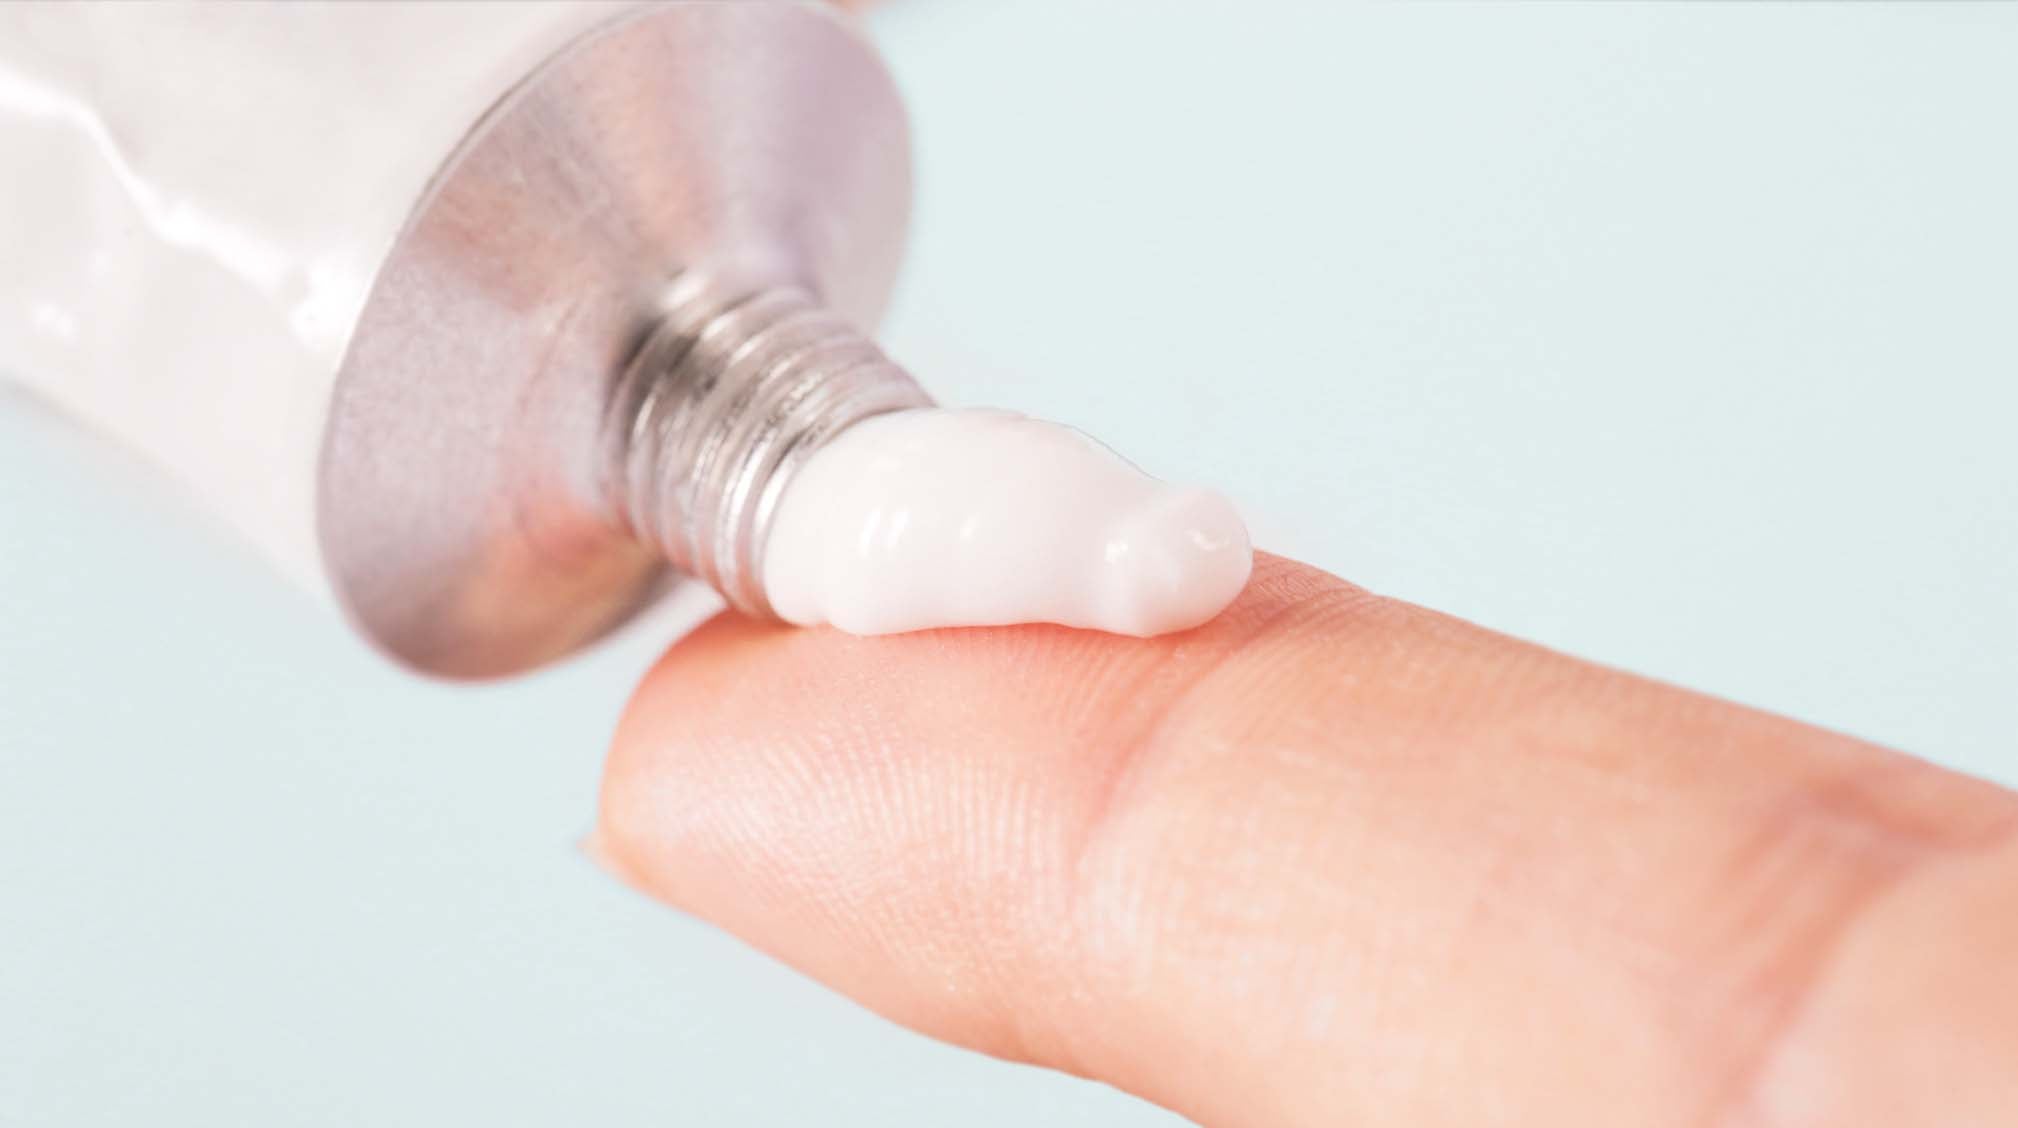 hand squeezing hydrocortisone cream on finger to be used for acne